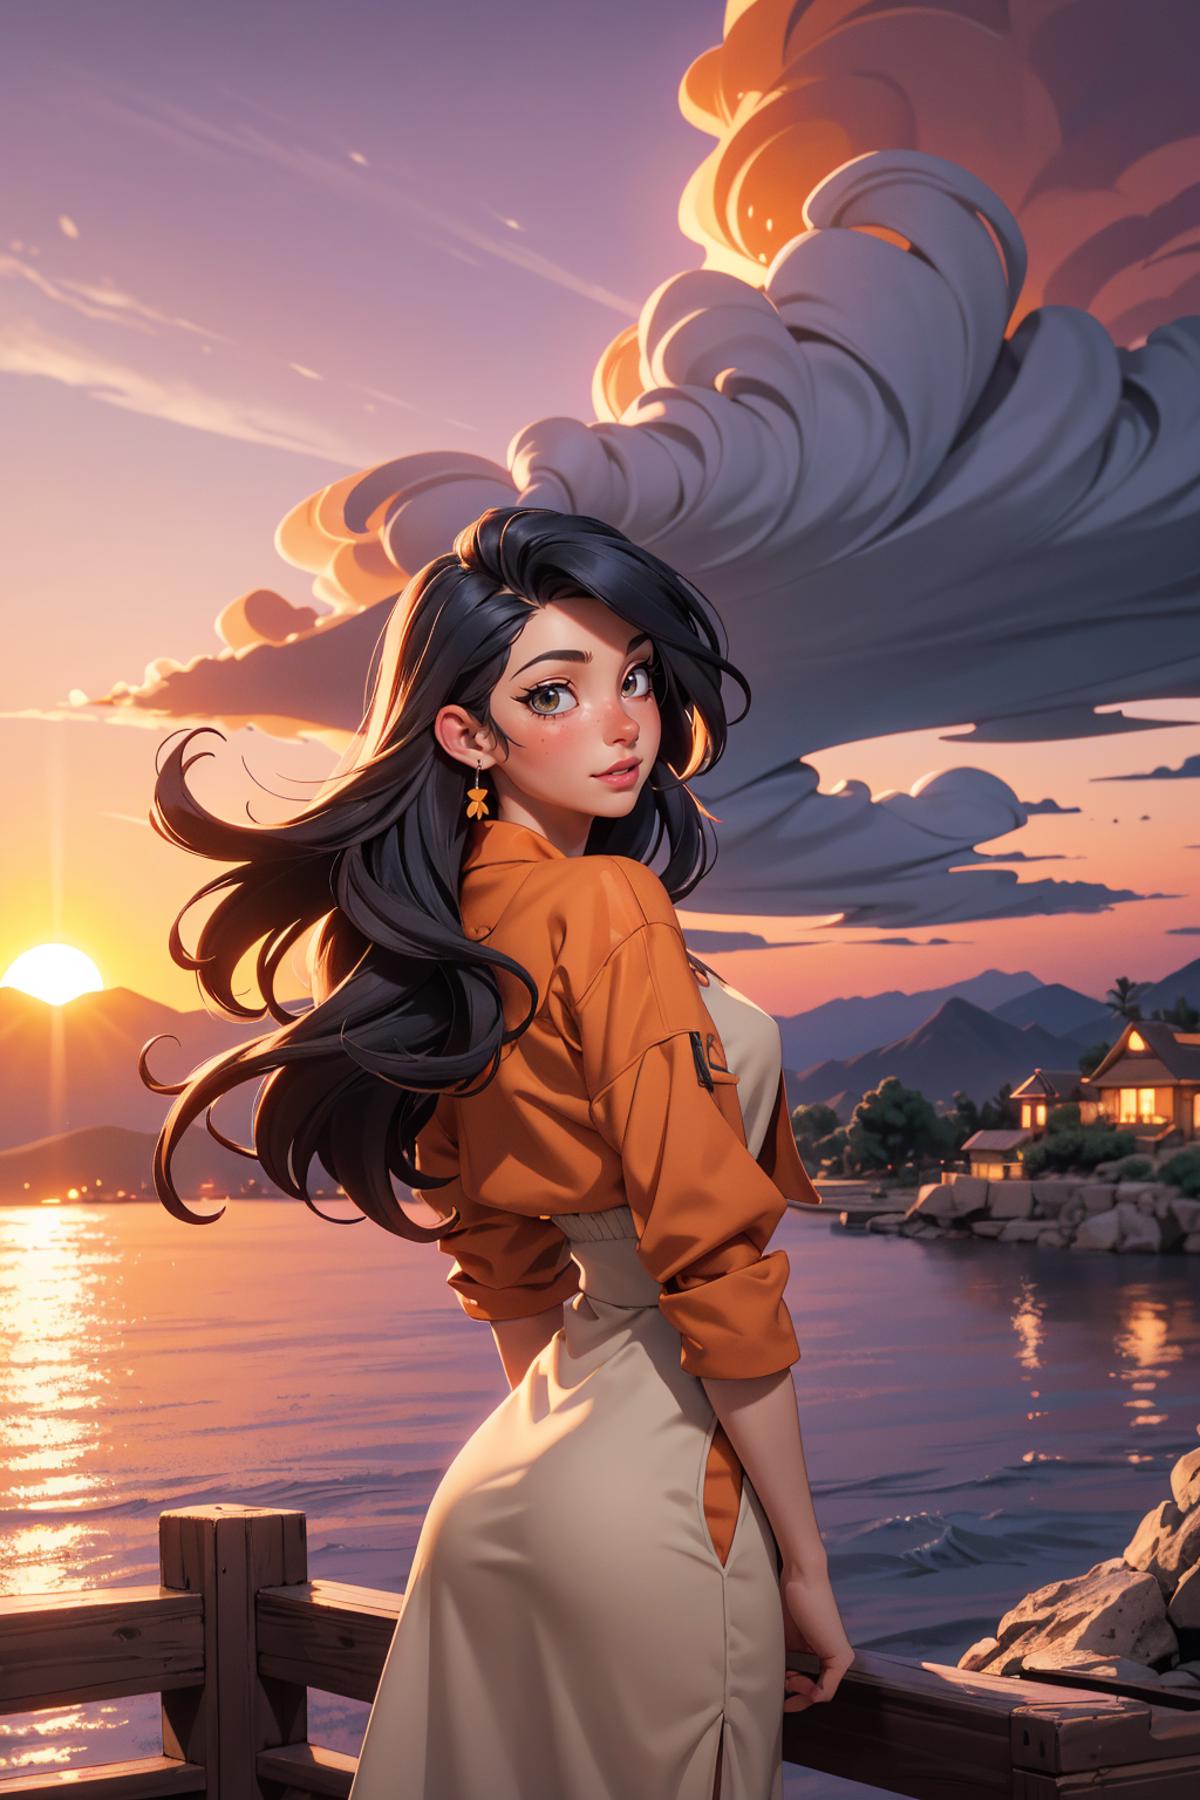 Anime-style illustration of a woman with long black hair, wearing an orange jacket, standing near a body of water with mountains in the background.